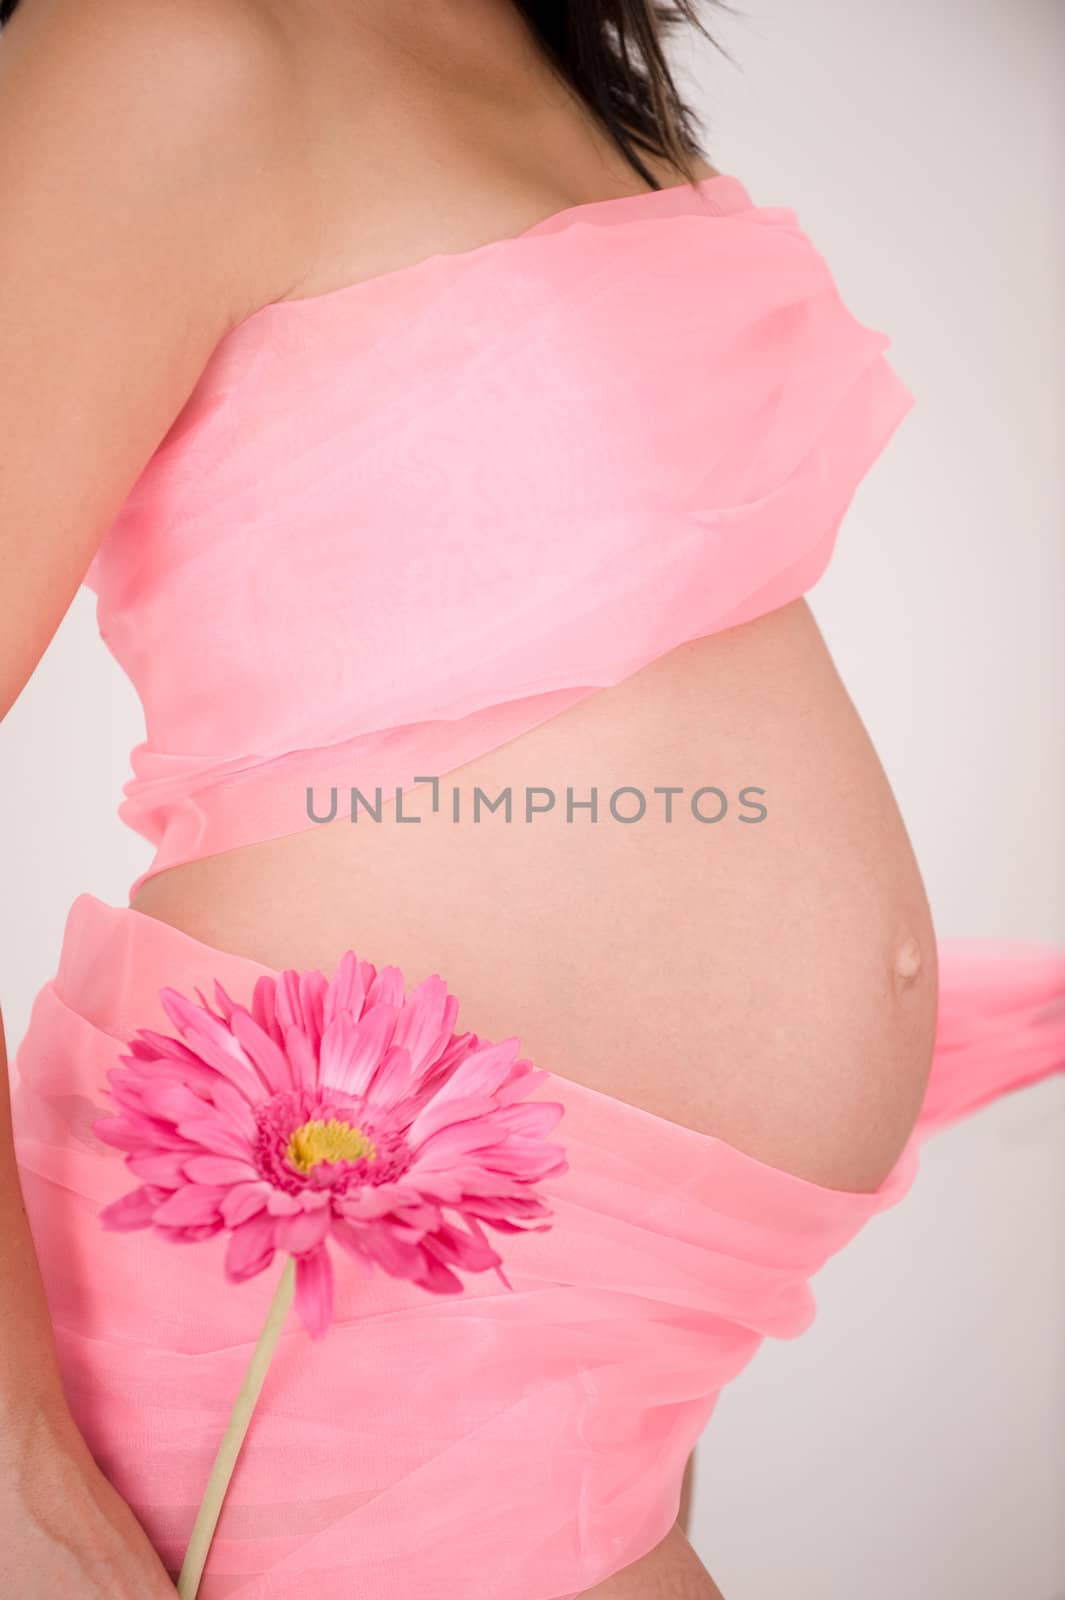 Pregnant woman showing stomach by Ansunette